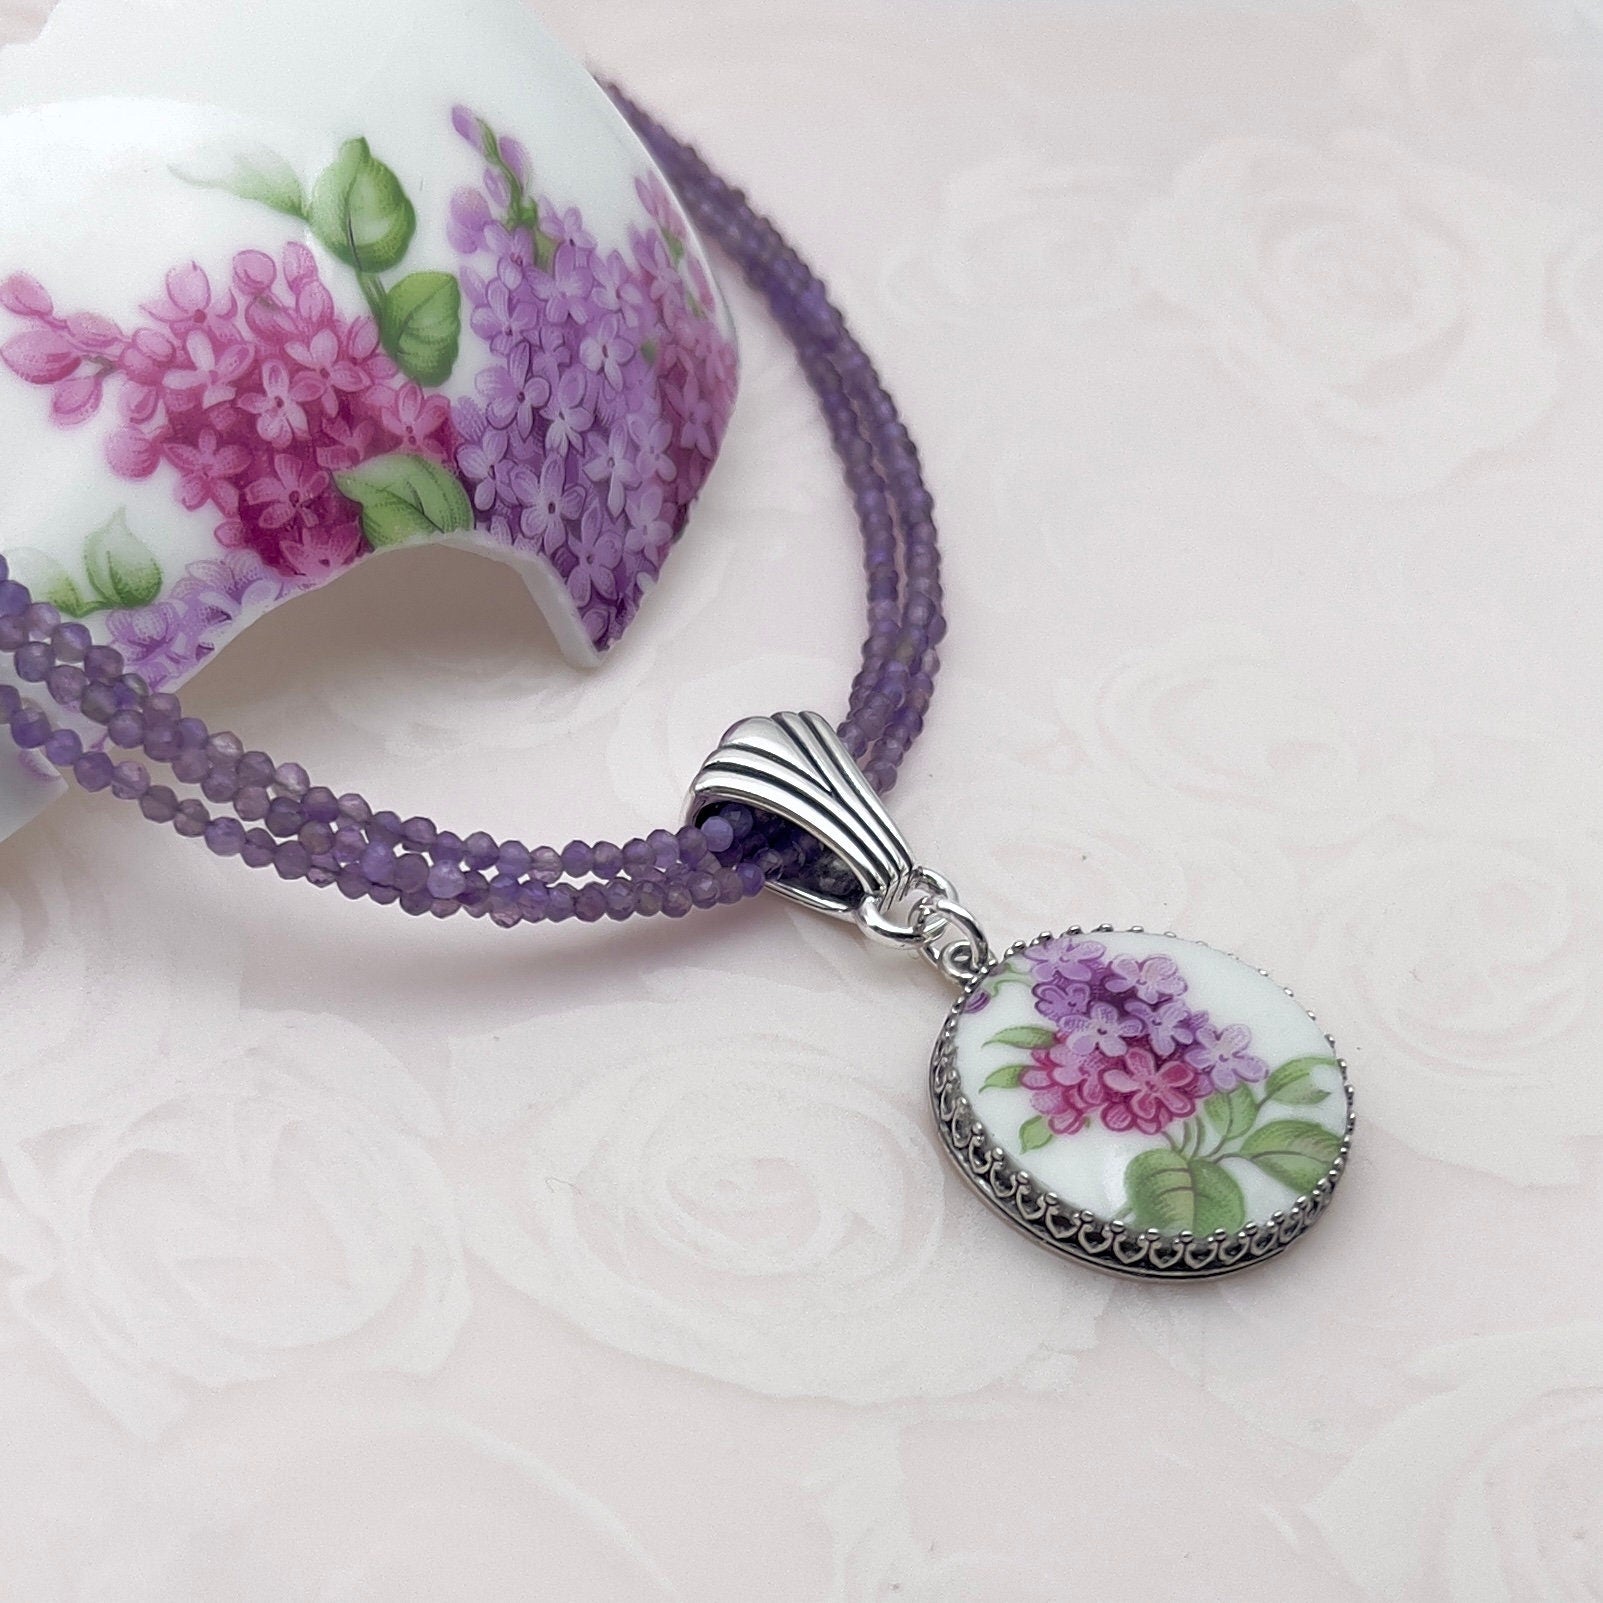 Adjustable Purple Lilac Necklace, Statement Broken China Jewelry, Amethyst Necklace, Gifts for Women